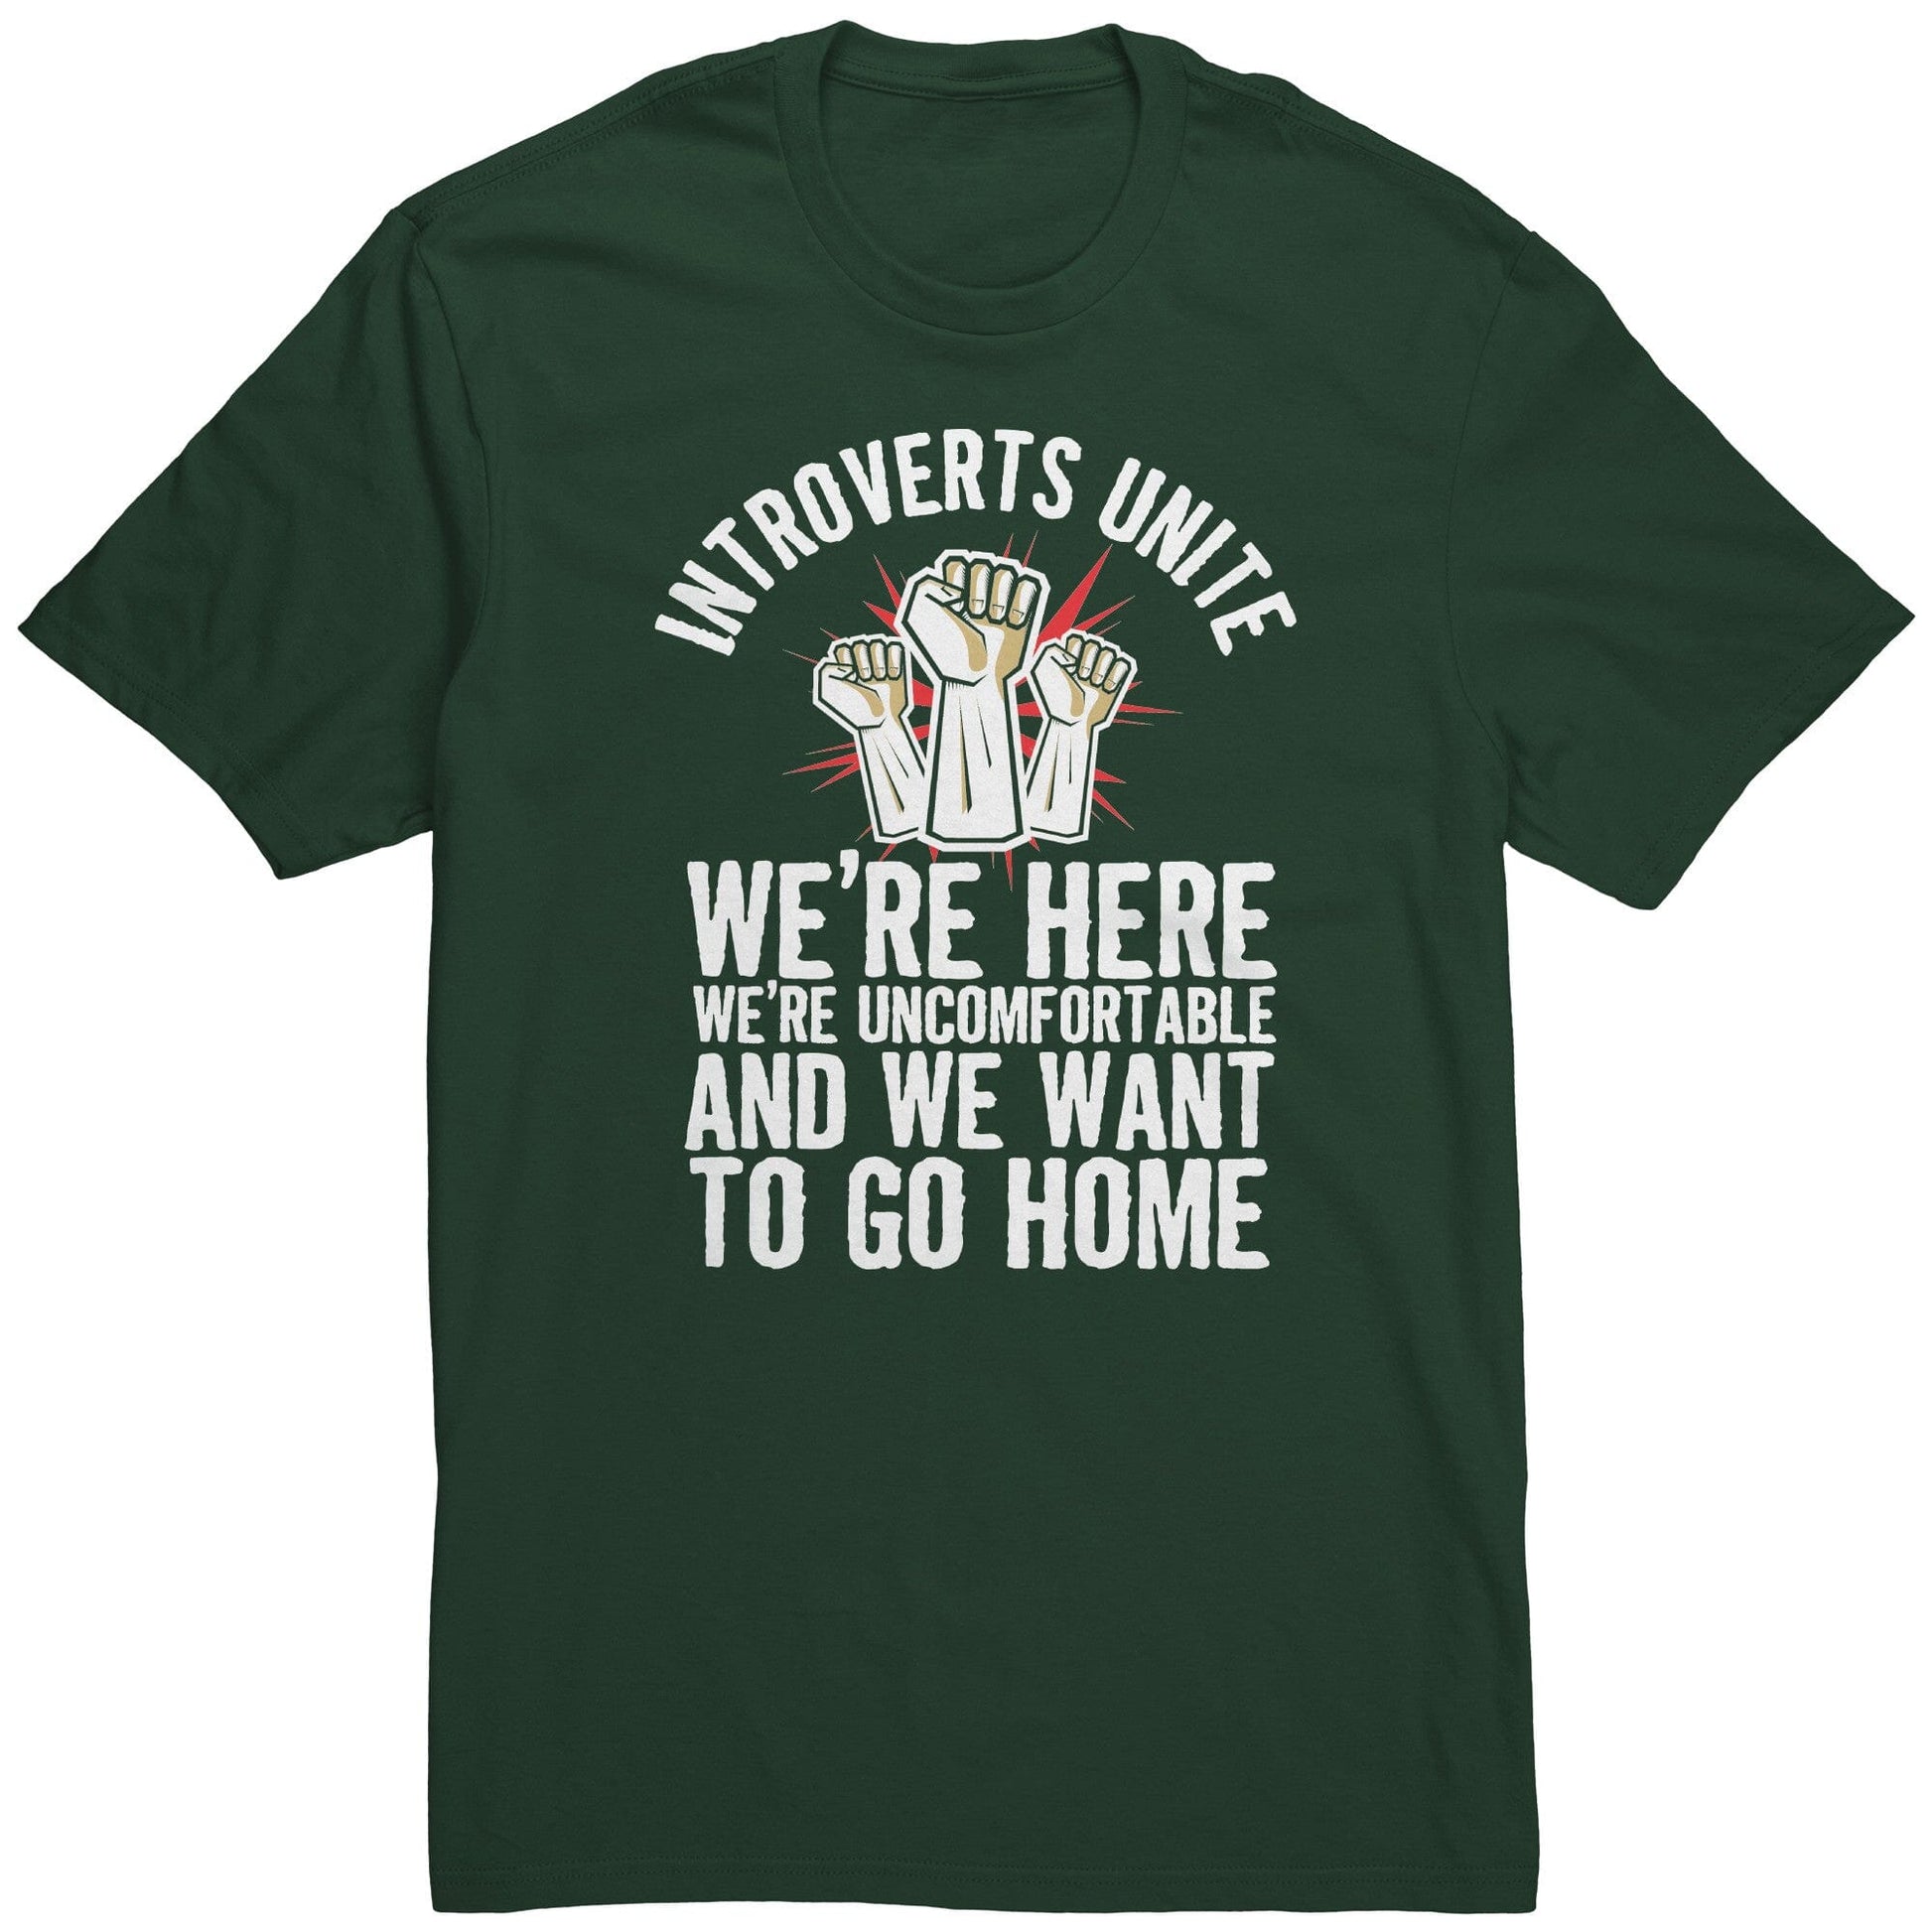 Funny "Introverts Unite - We're Here, We're Uncomfortable, and We Want To Go Home" Shirt Apparel Forest Green S 